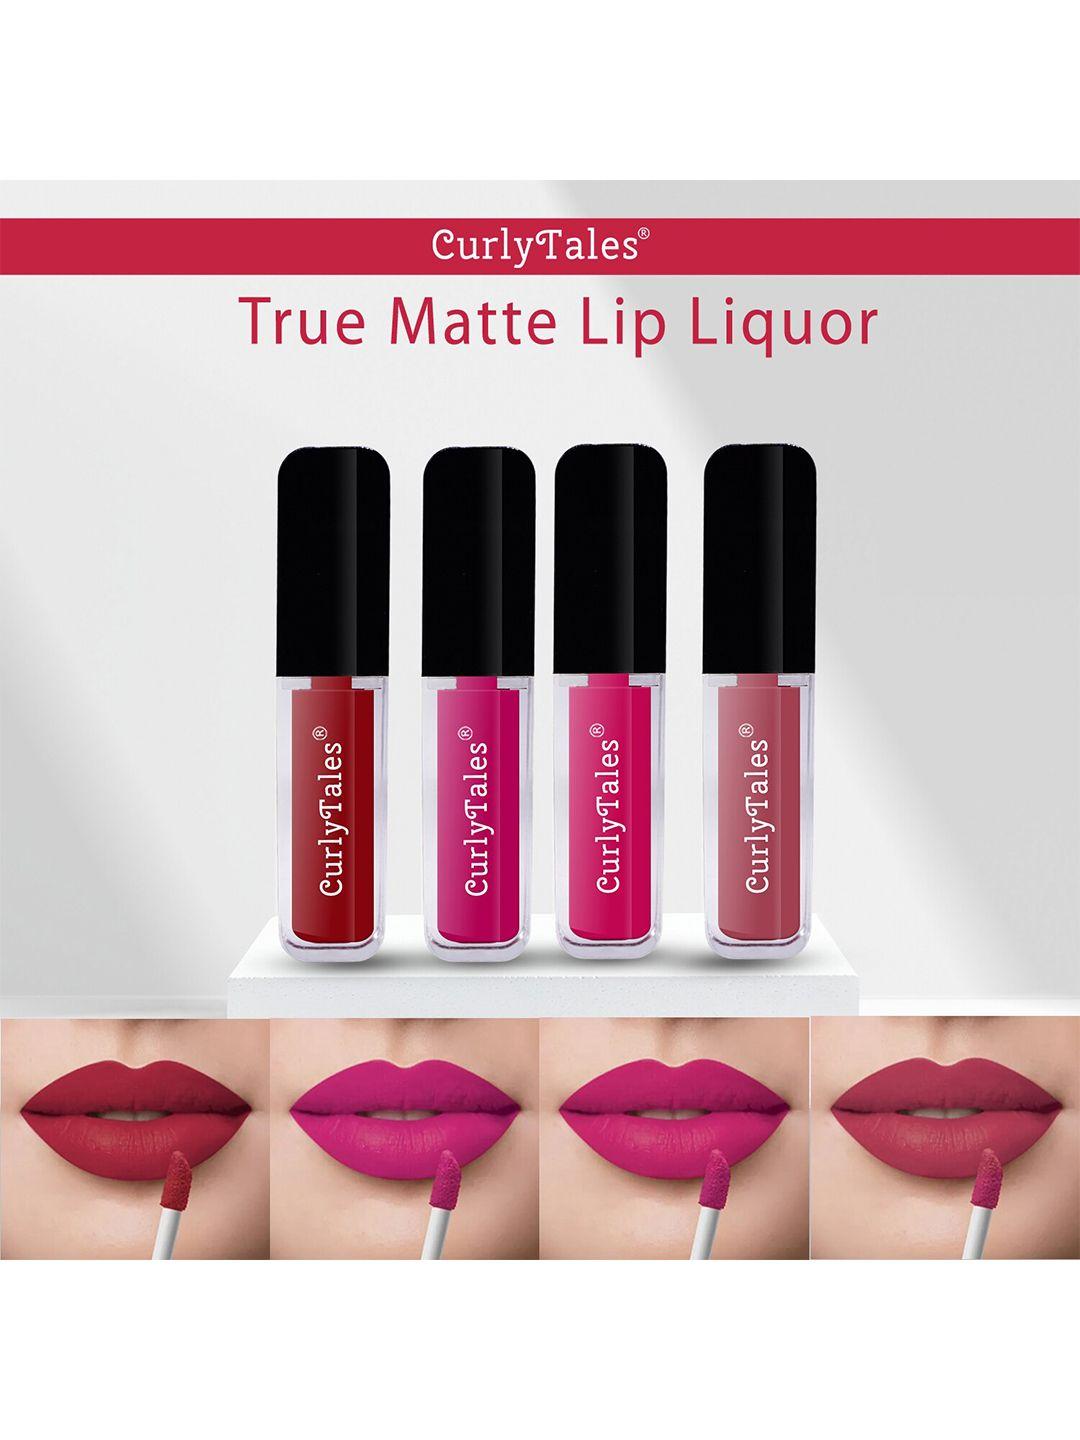 curlytales set of 4 true matte lip color 4 ml - shade 03, 04, 05, 08